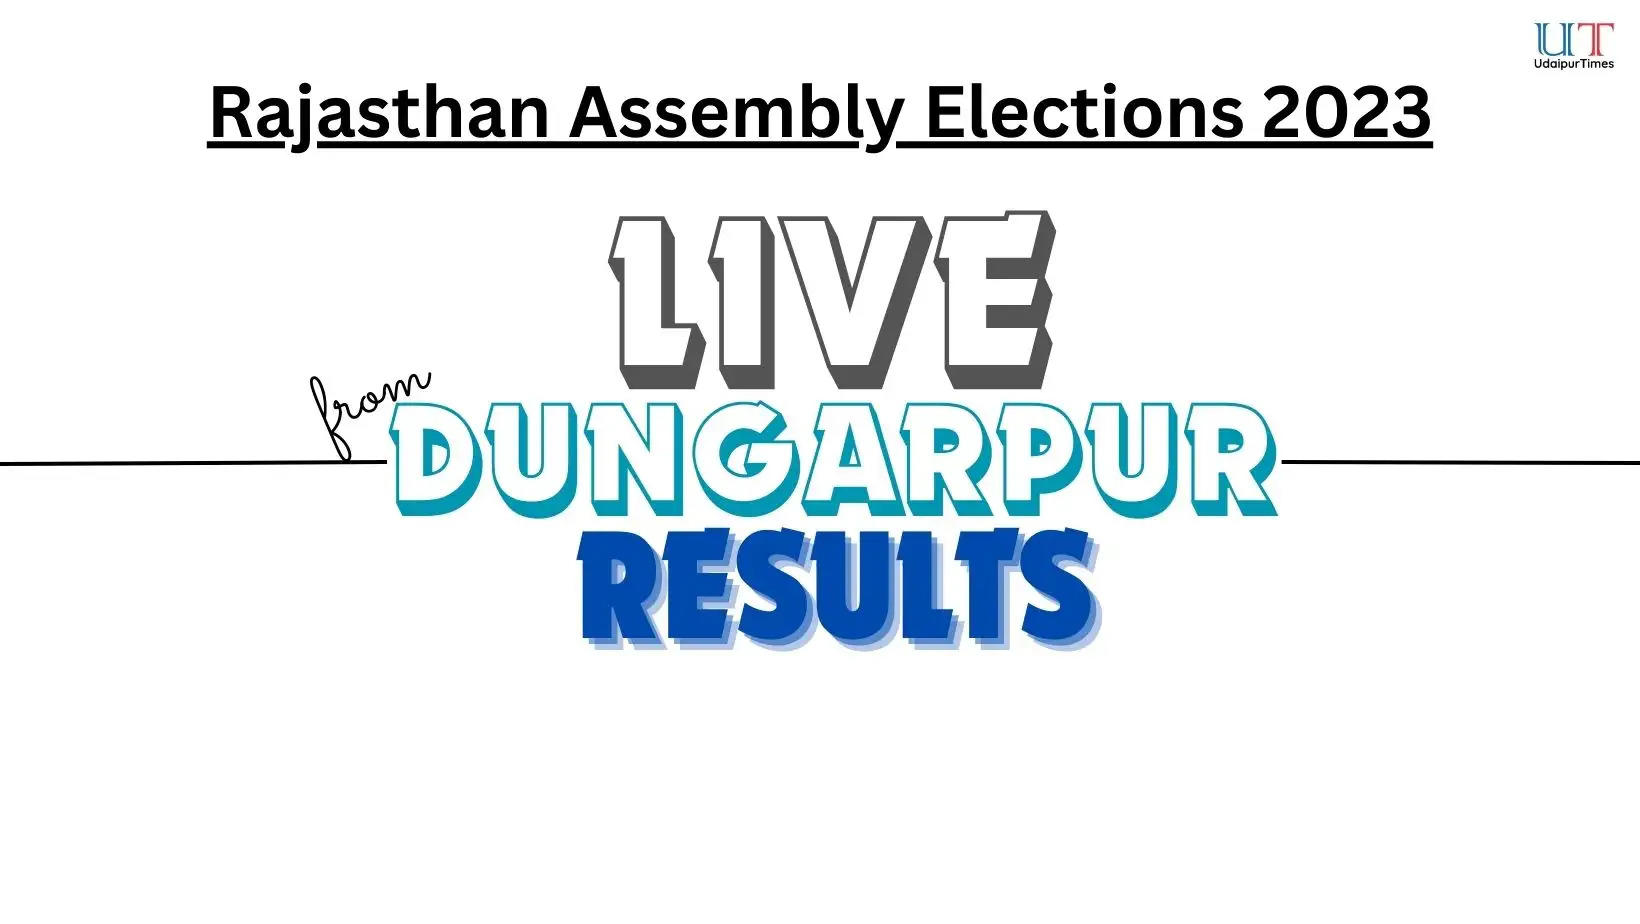 Live Election Results from Dungarpur